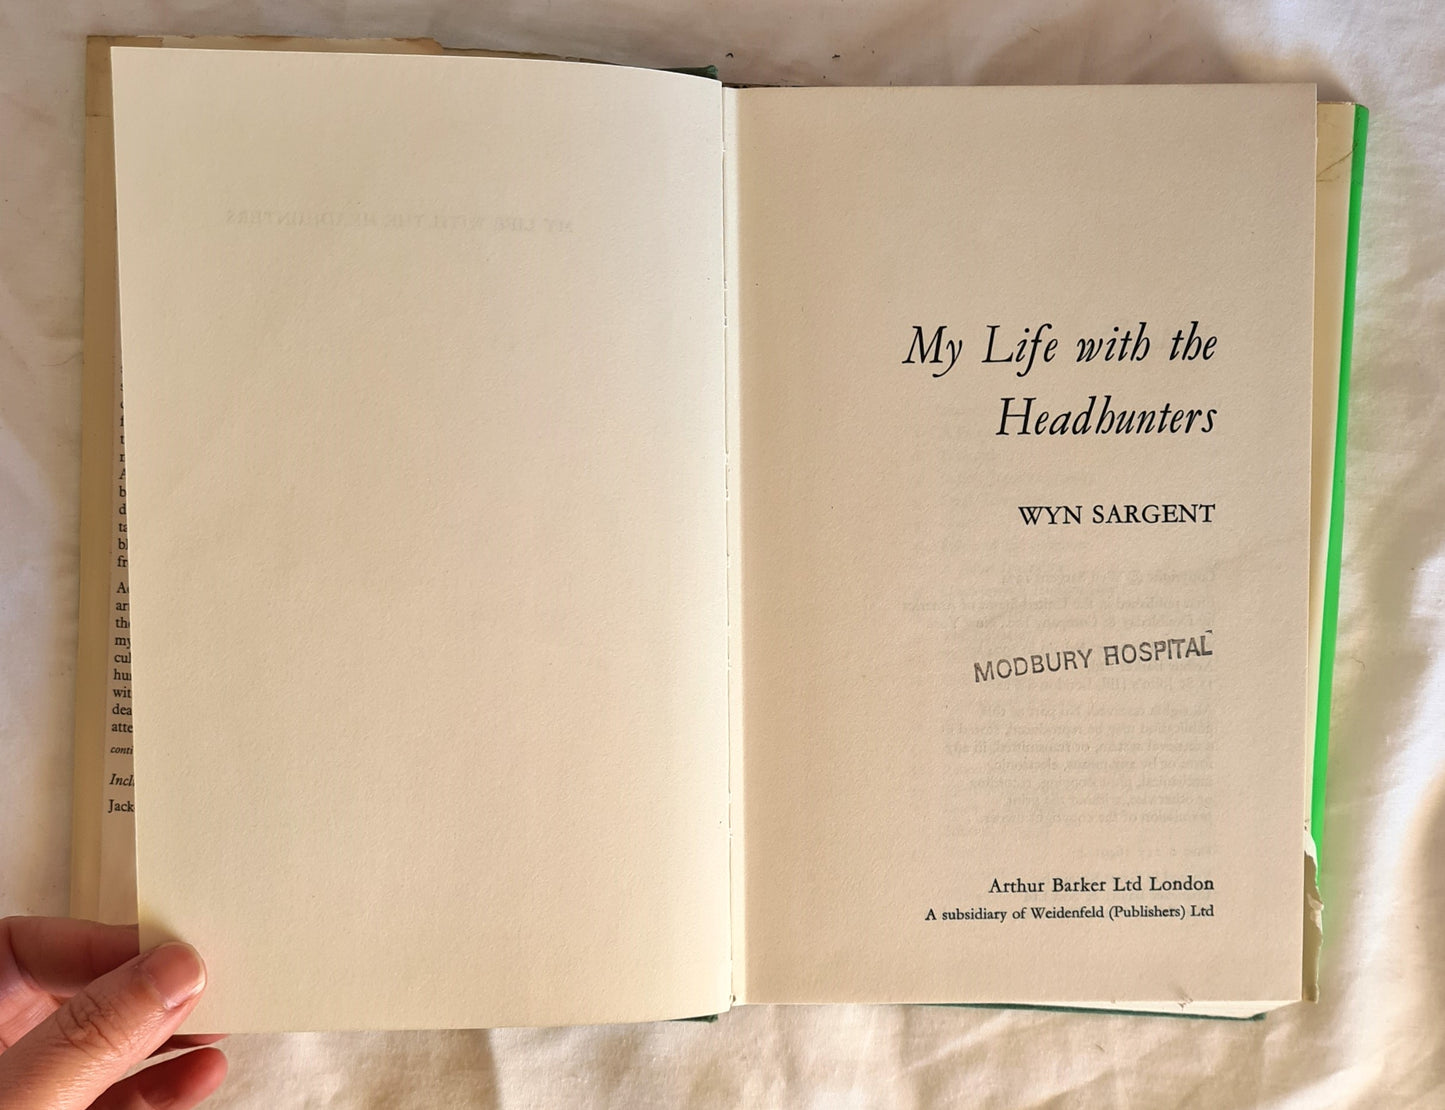 My Life With the Headhunters by Wyn Sargent